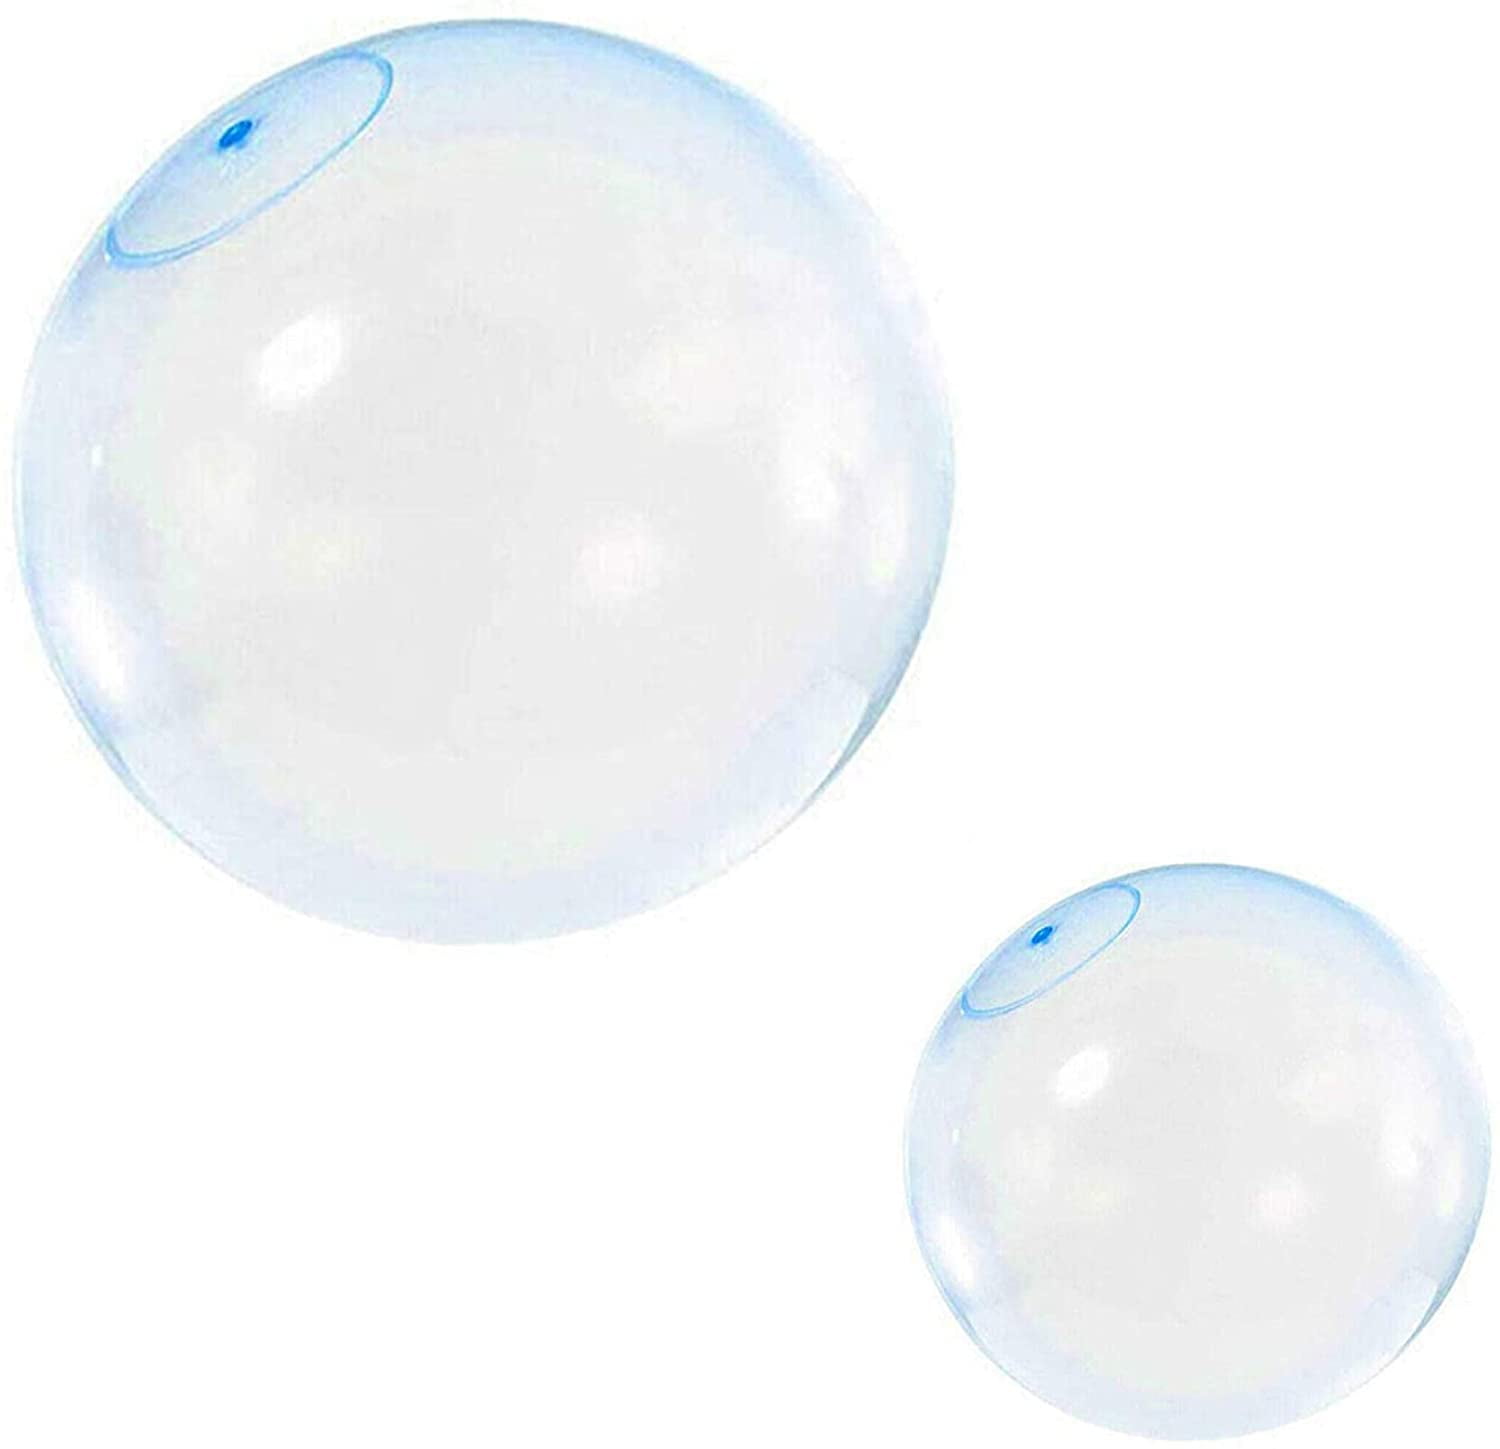 Large Bubble Ball Water Balloon Transparent Bounce Funny Kids Game Toy Rubber 